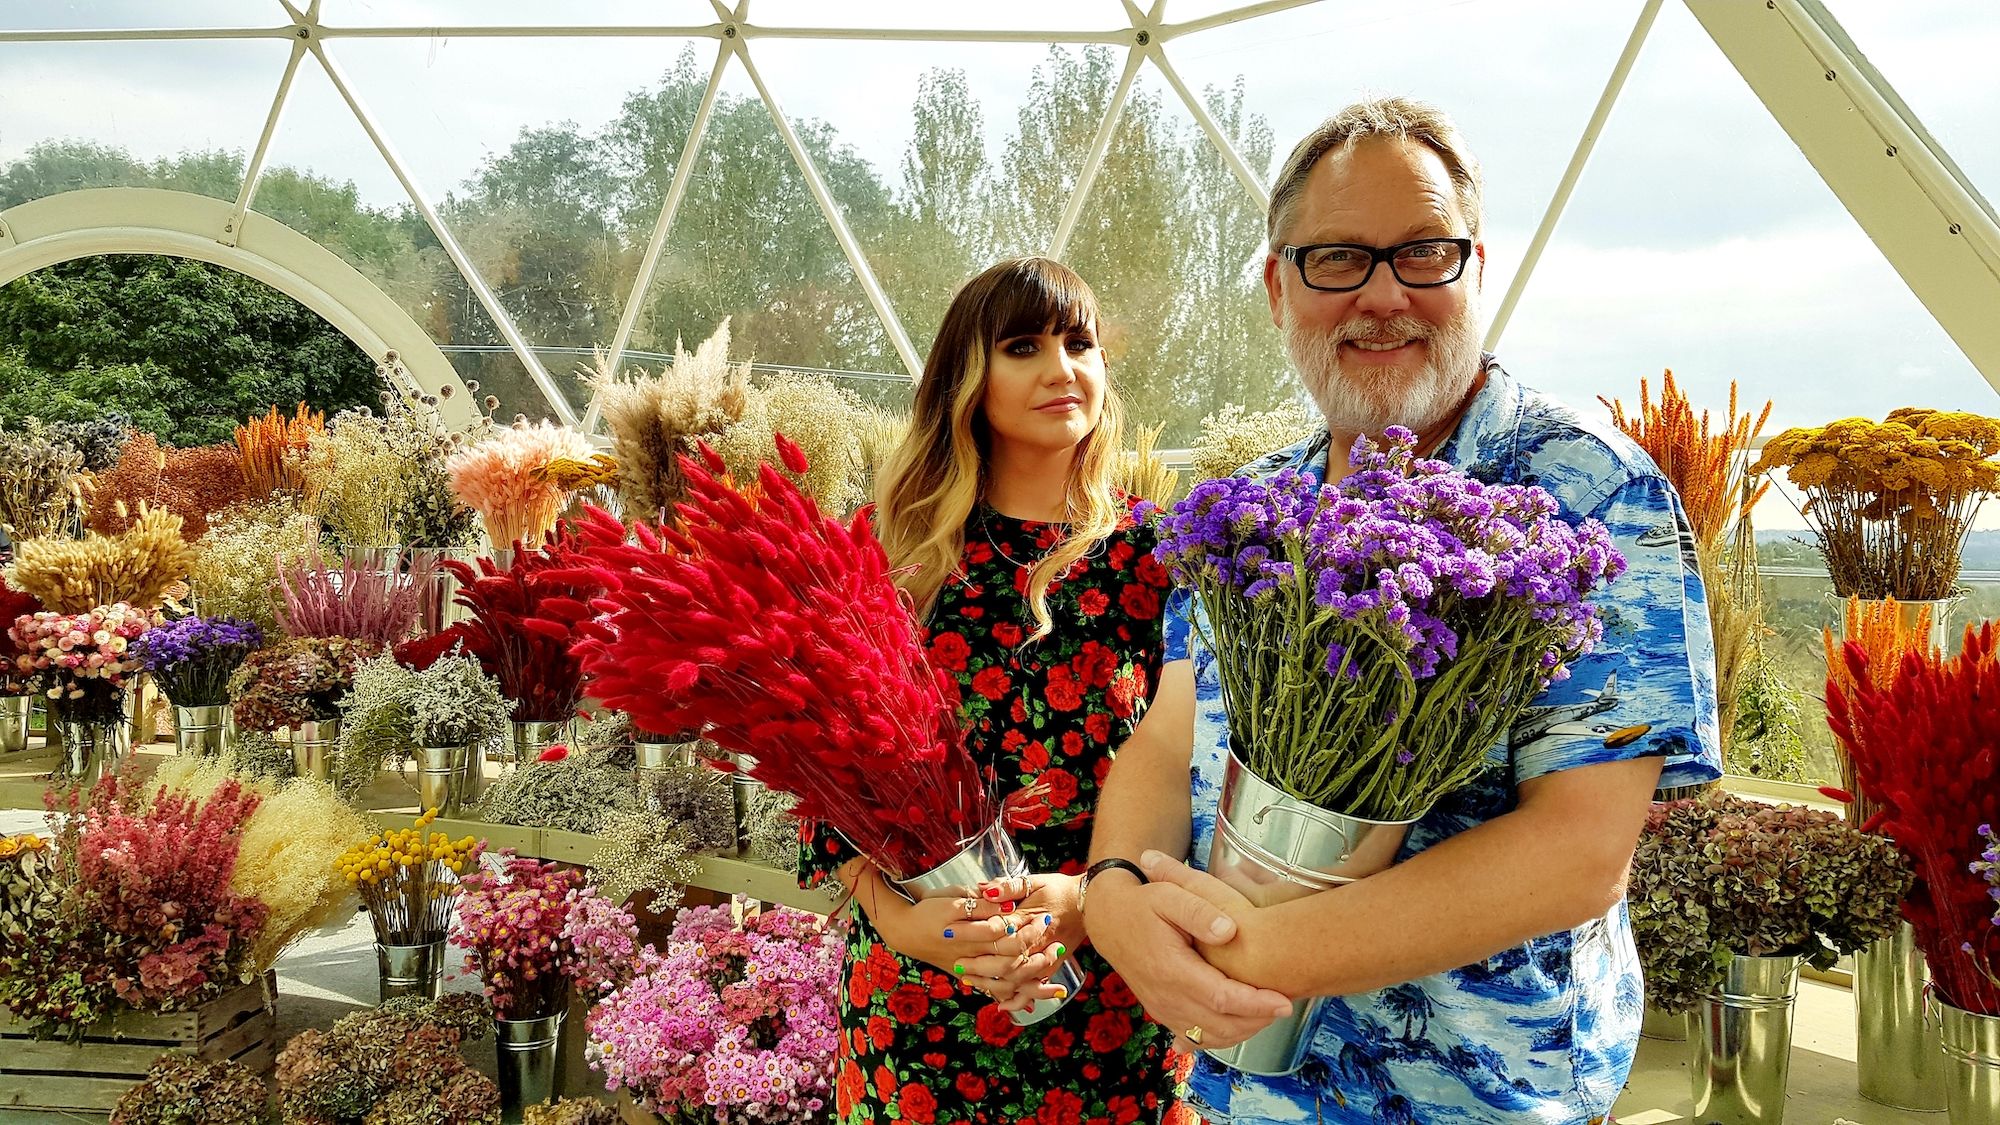 Natasia Demetriou and Vic Reeves in The Big Flower Fight